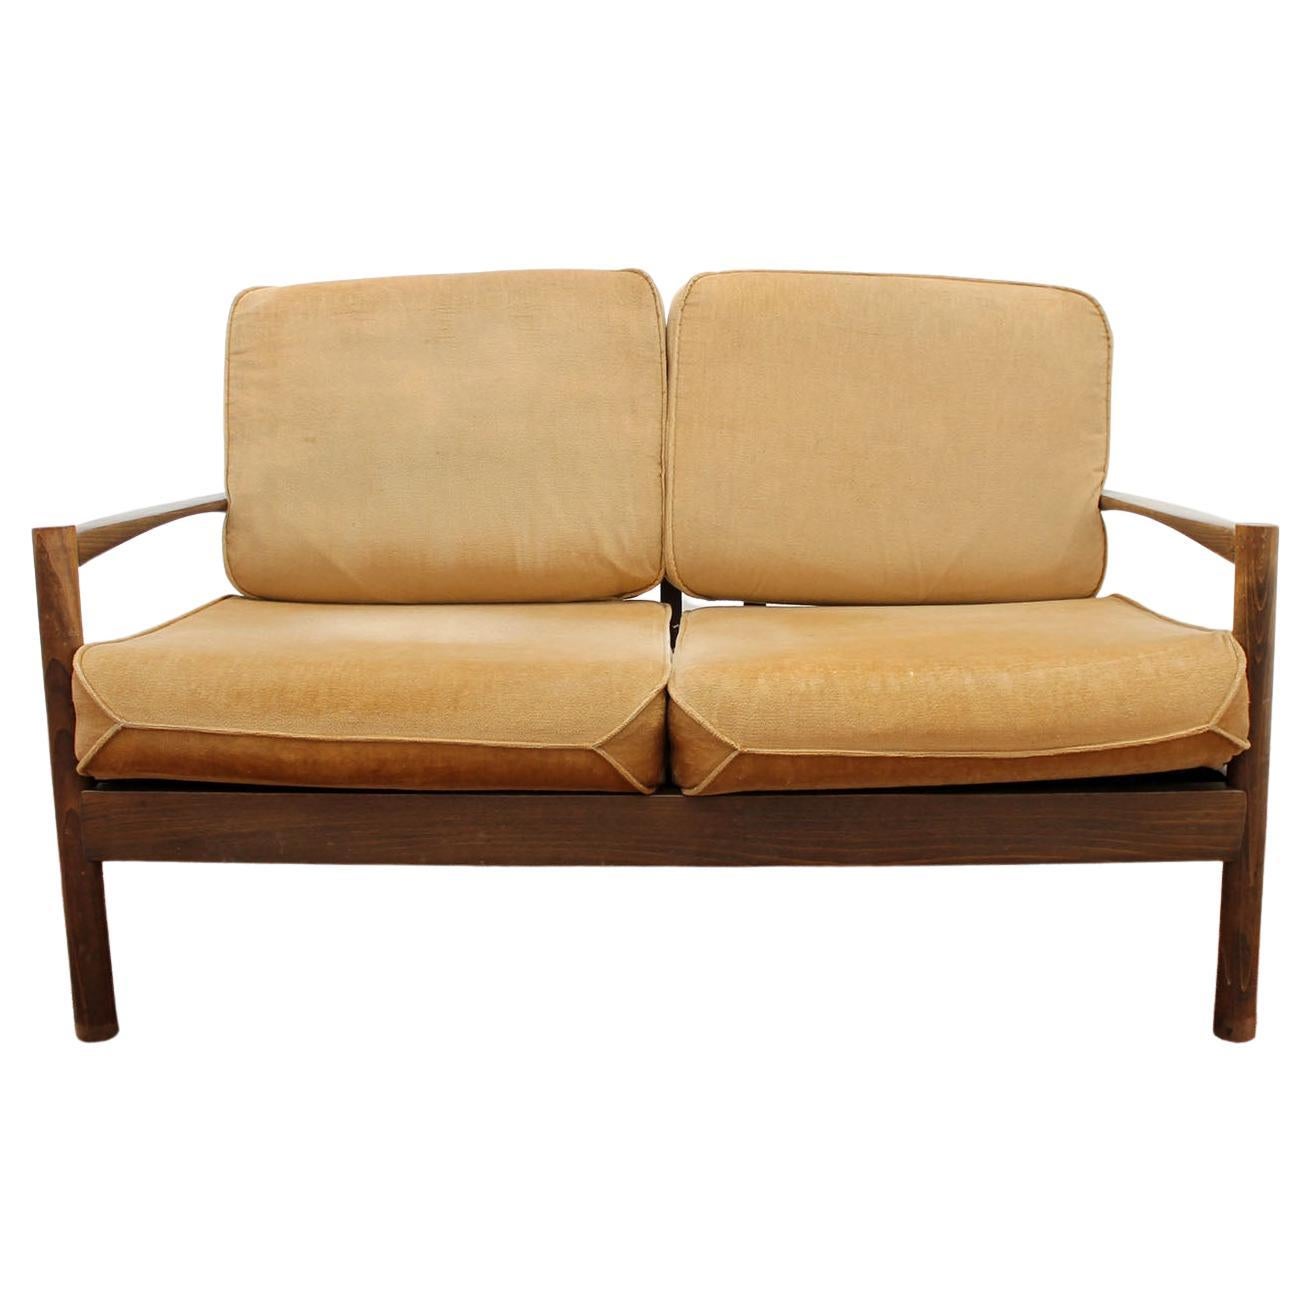 Vintage Scandinavian Style Two Seater Sofa, 1980s